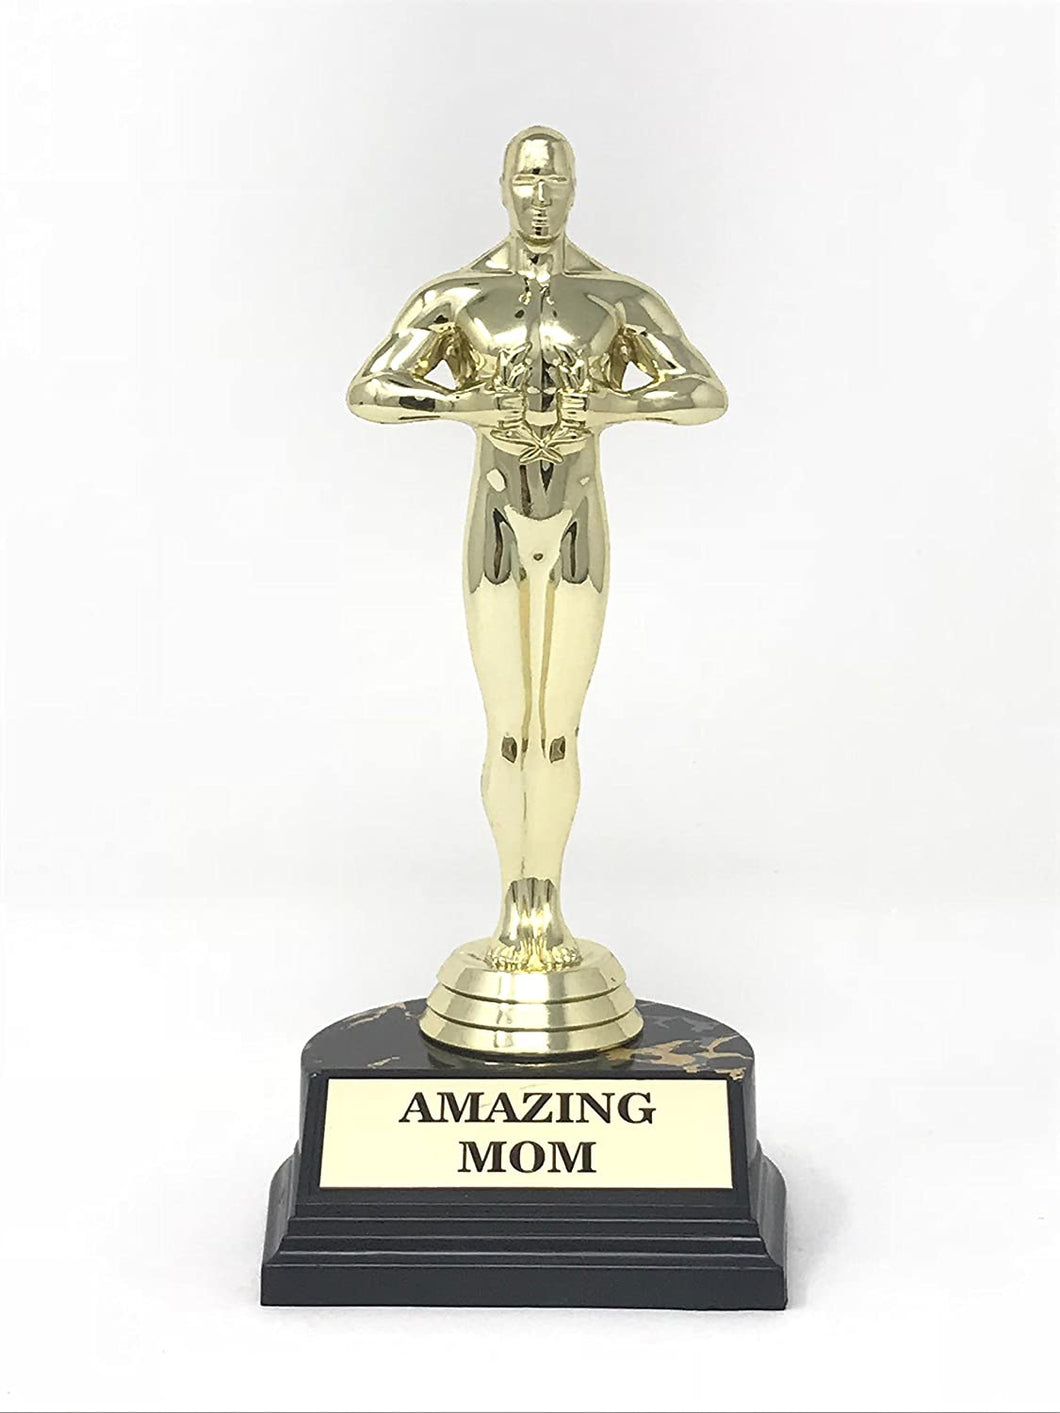 Amazing Mom (7 inches Trophy)